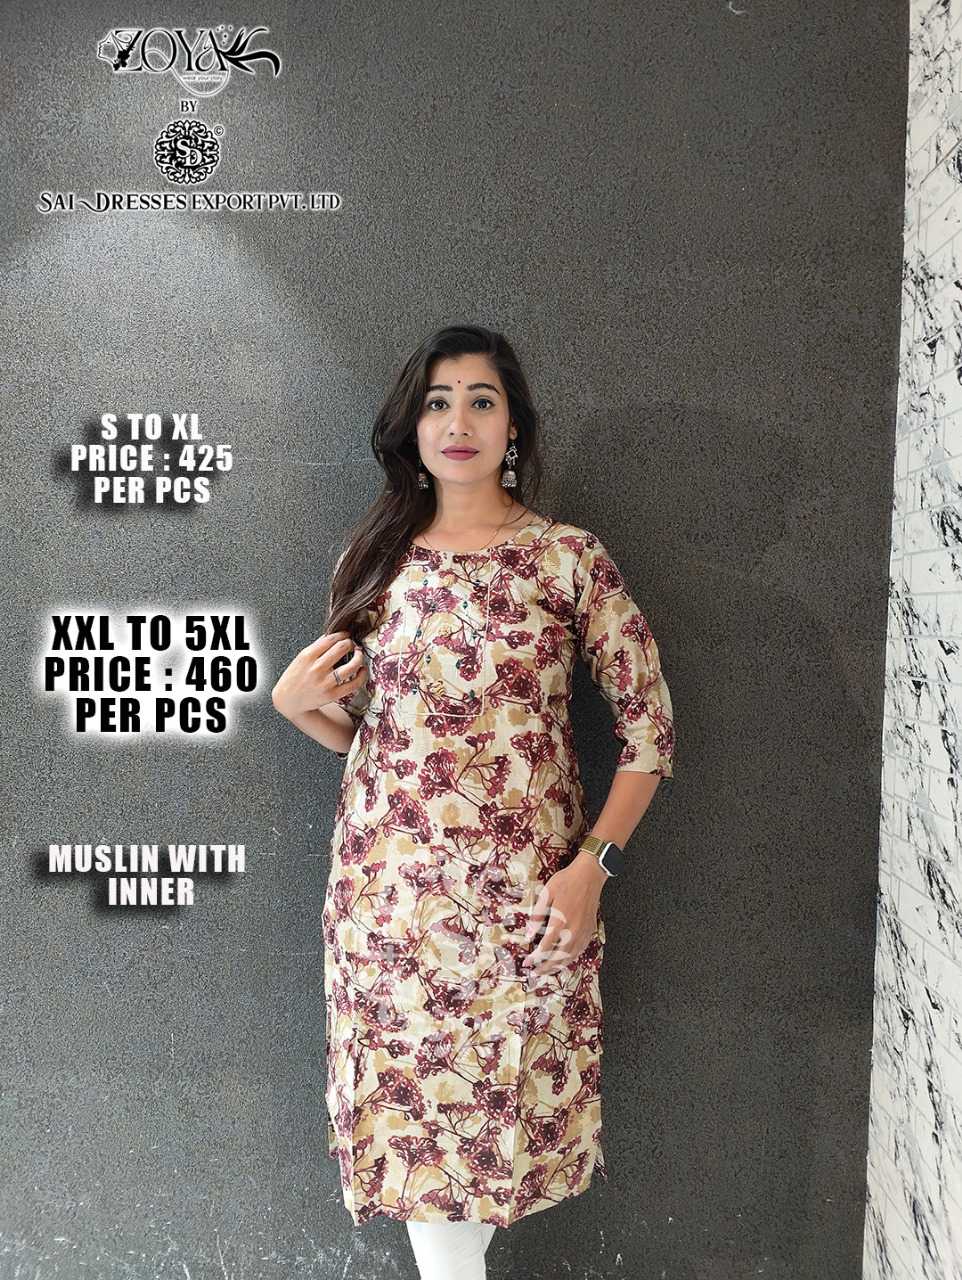 SAI DRESSES PRESENT D.NO SD90 READY TO WEAR BEAUTIFUL MUSLIN PRINTED STRAIGHT KURTI COMBO COLLECTION IN WHOLESALE RATE IN SURAT